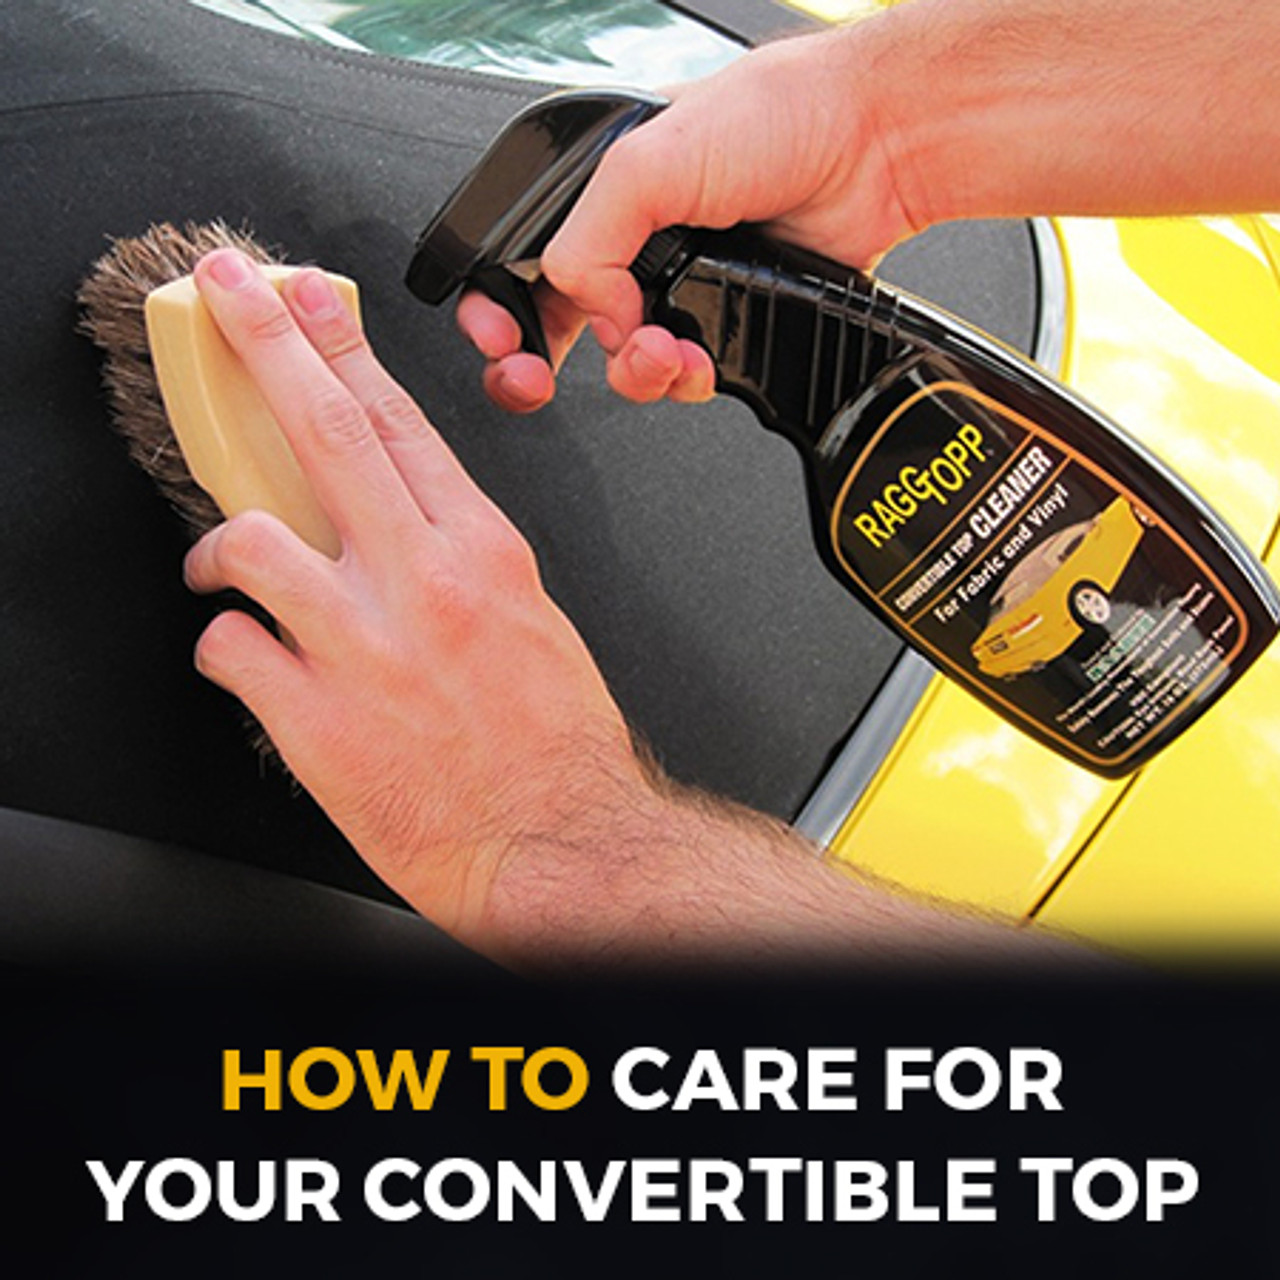 Convertible Top Care Detailing 101: clean and protect vinyl and